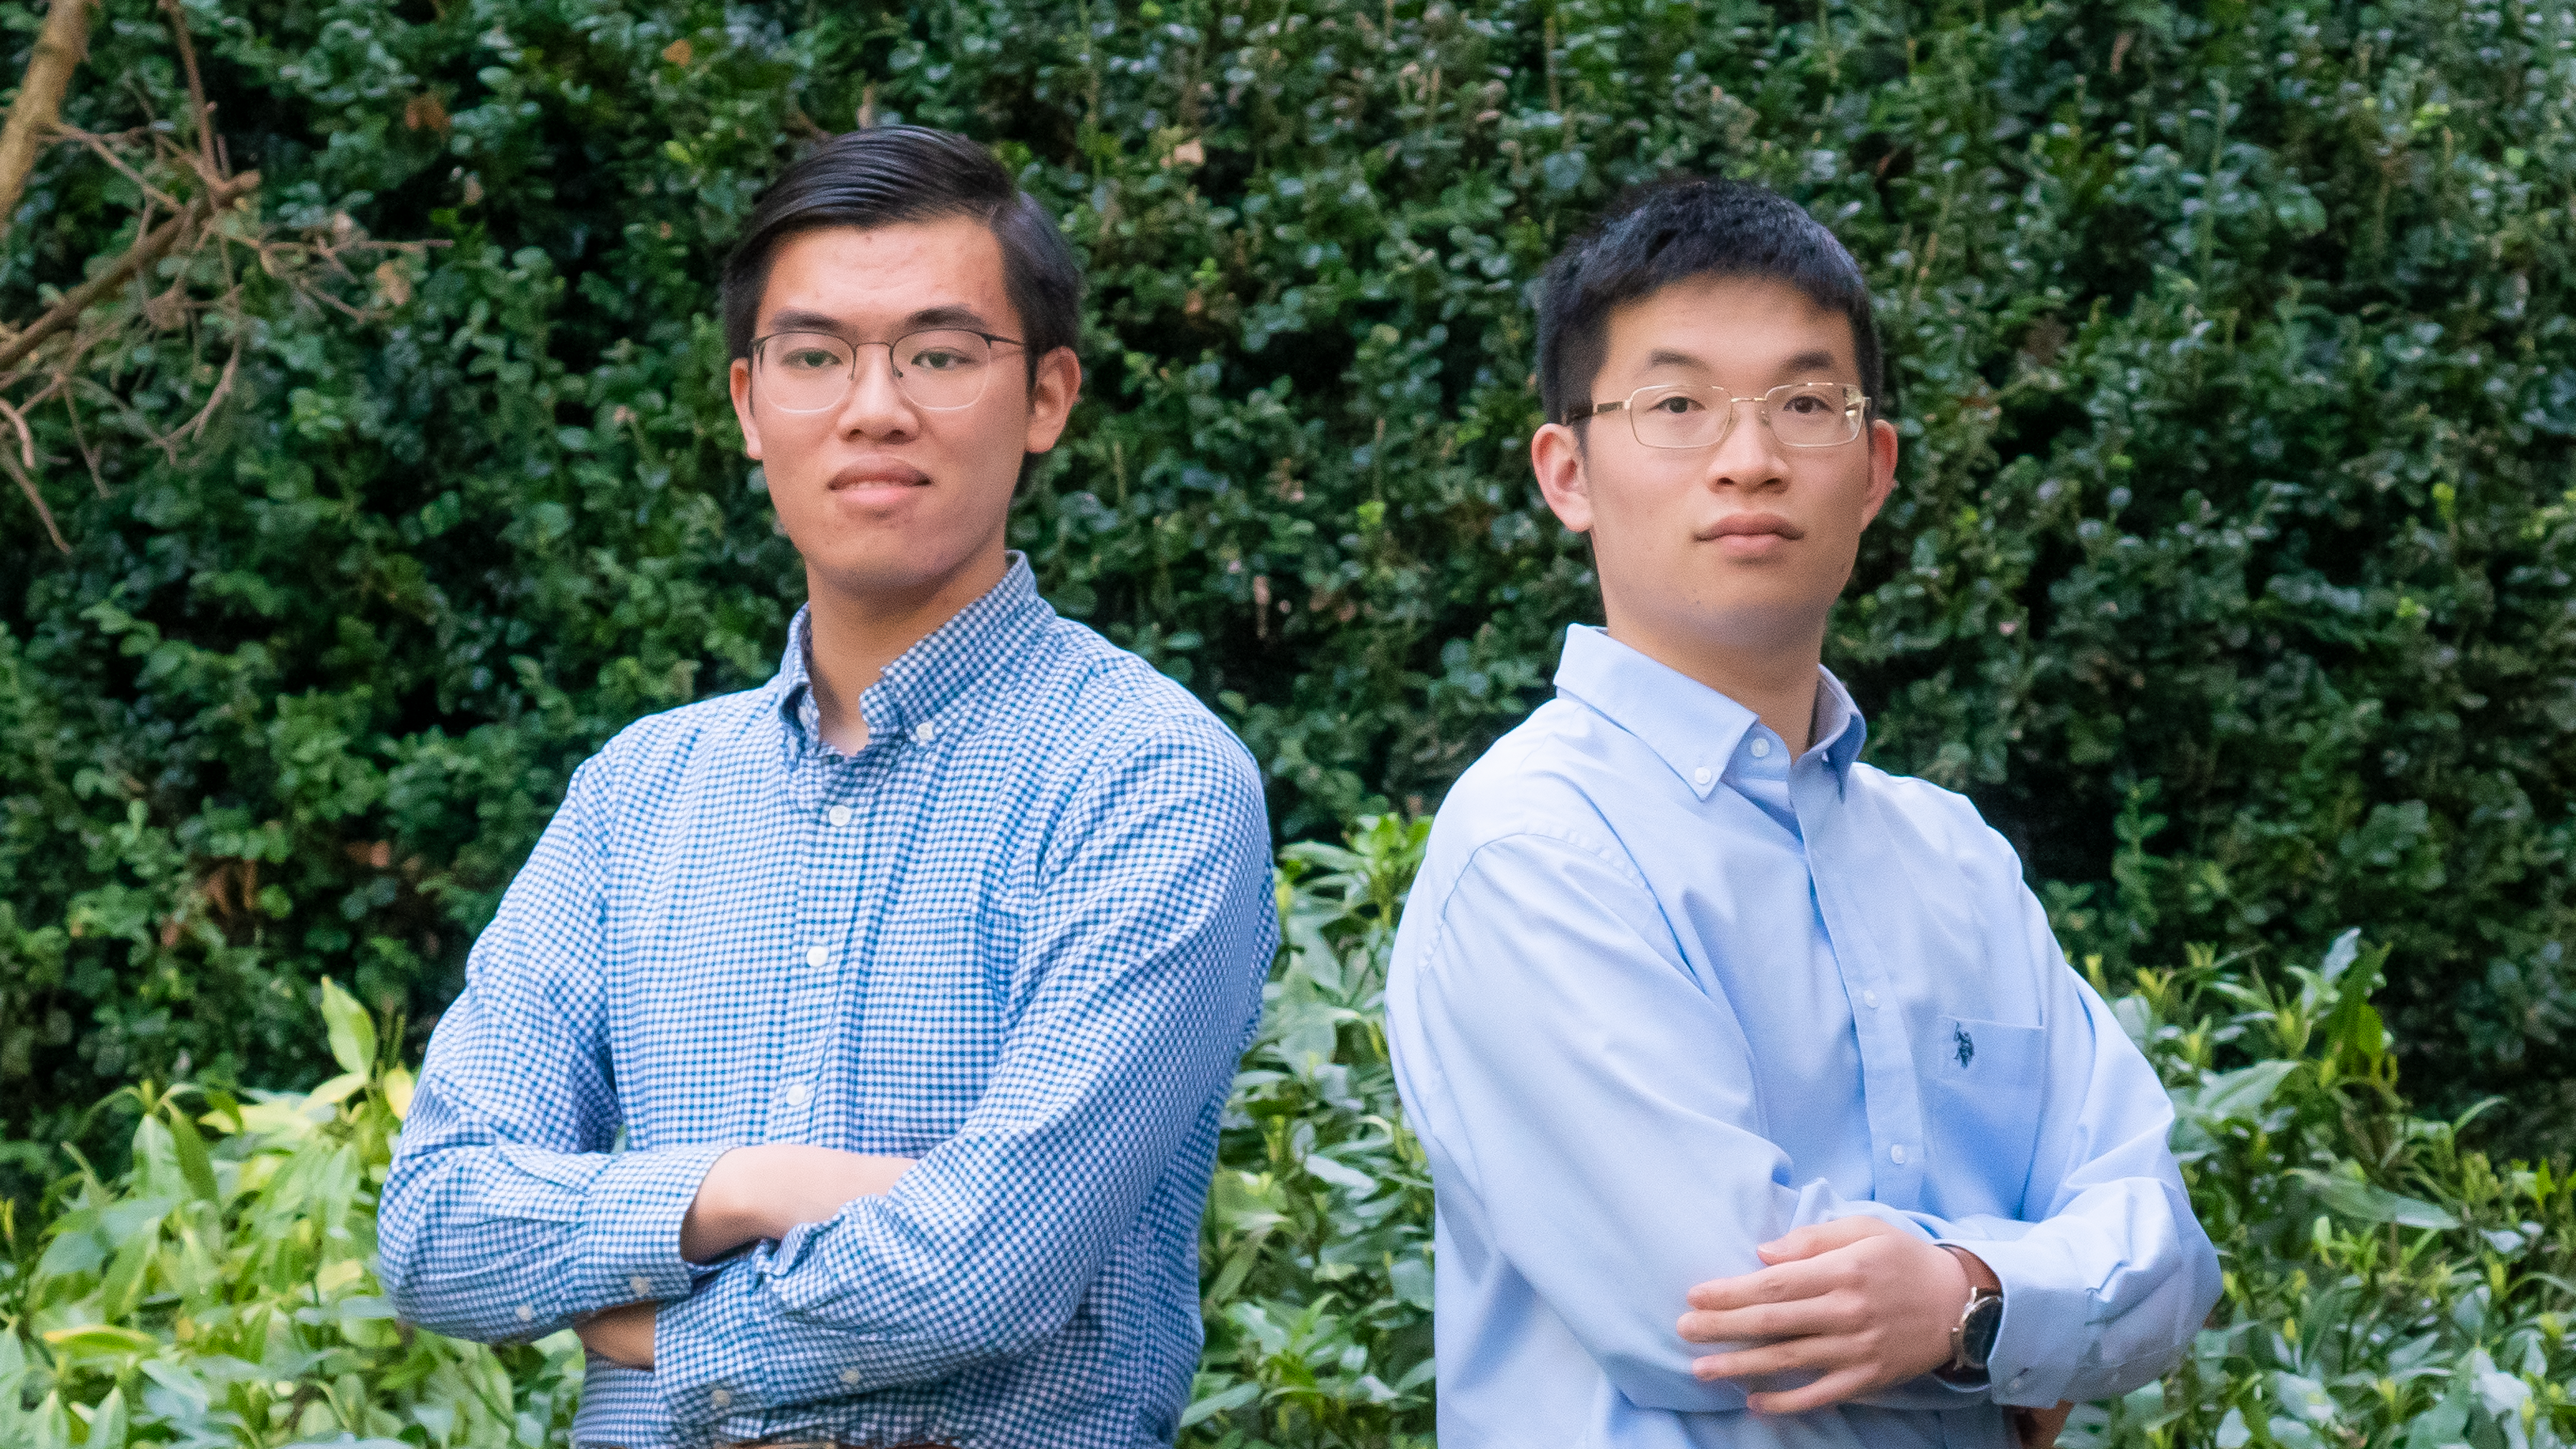 Alvin (left) is a young Asian man wearing a blue short, and Jack (right) is a young Asian man wearing a blue shirt and glasses. Both stand with their arms folded, in front of greenery on campus.